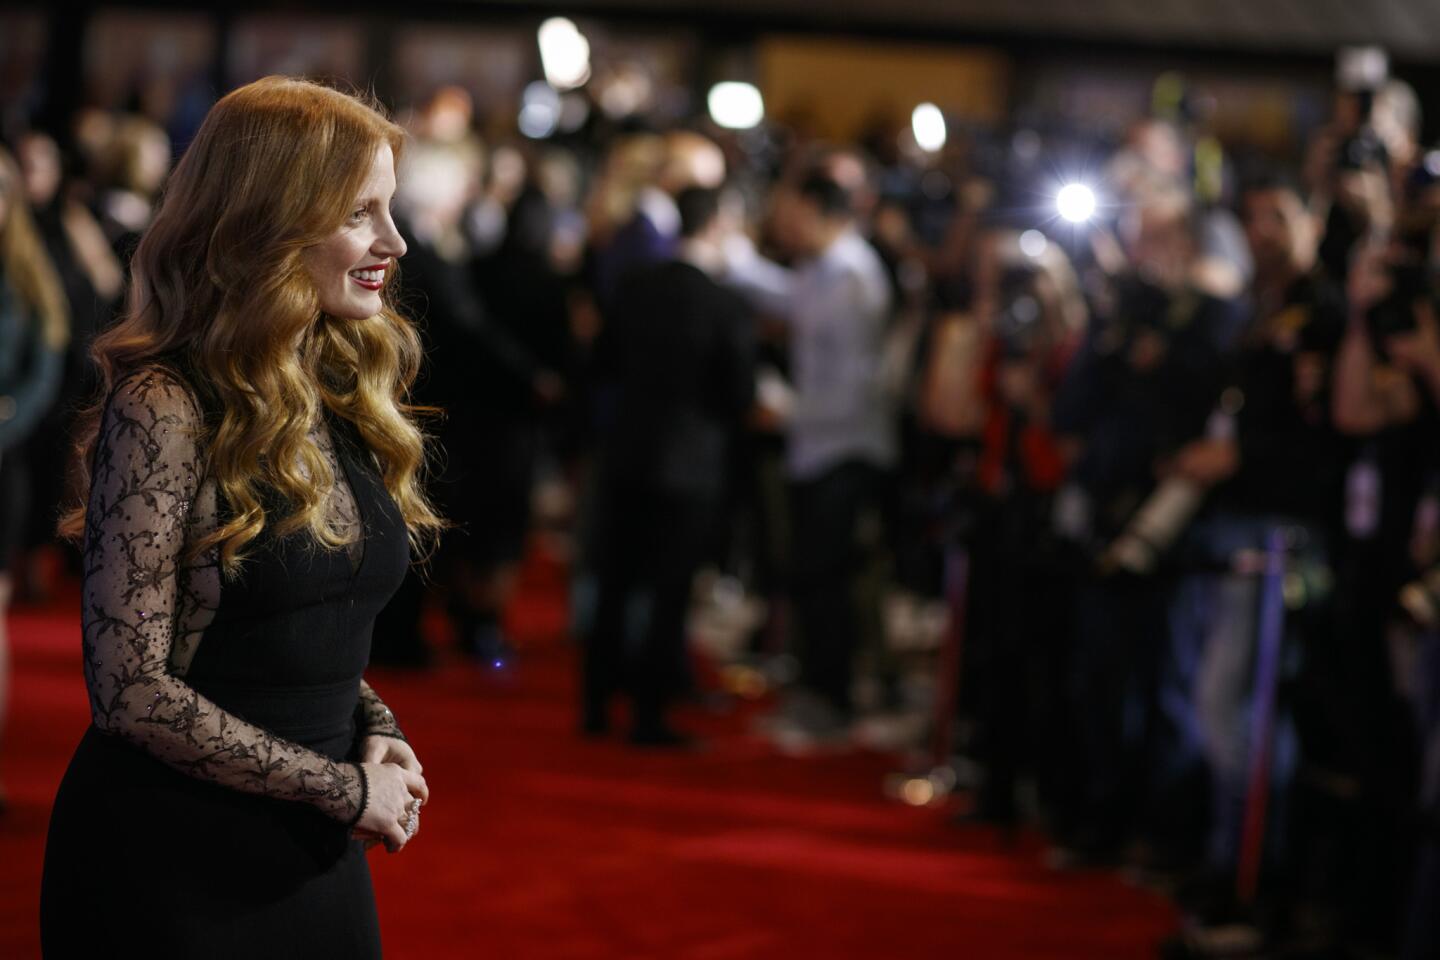 Actress Jessica Chastain walks the red carpet of the 18th annual Palm Springs International Film Festival Gala on Tuesday at the Palm Springs Convention Center. Chastain received the Chairman's Award for her work on "Molly's Game."